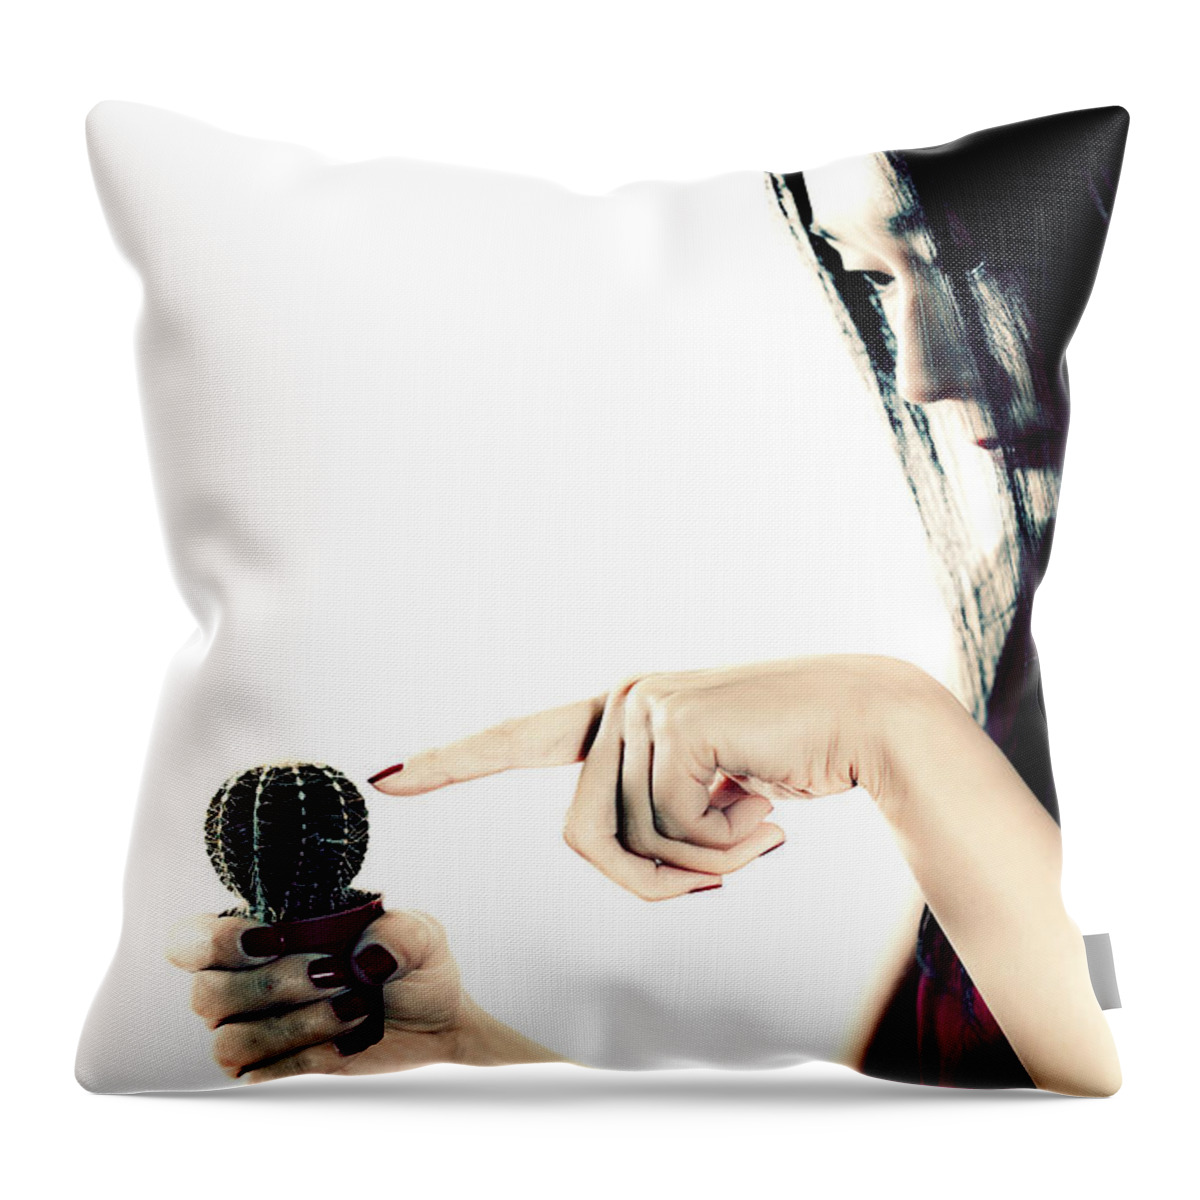 Finger Throw Pillow featuring the photograph Cactus by Joana Kruse